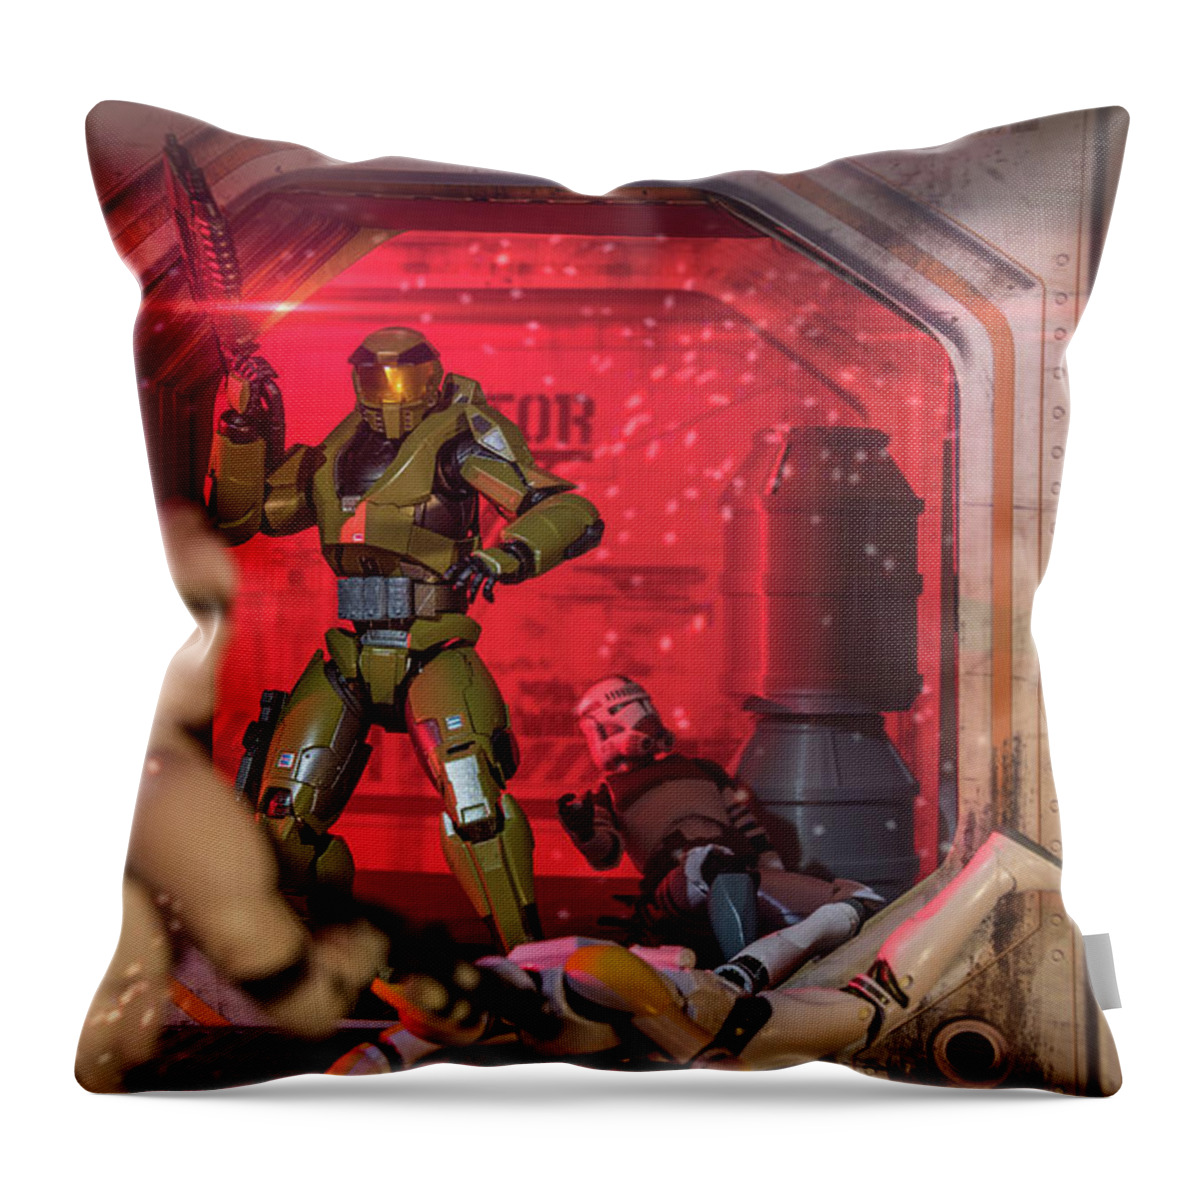 Halo Throw Pillow featuring the photograph You Are Next by Kristopher Schoenleber